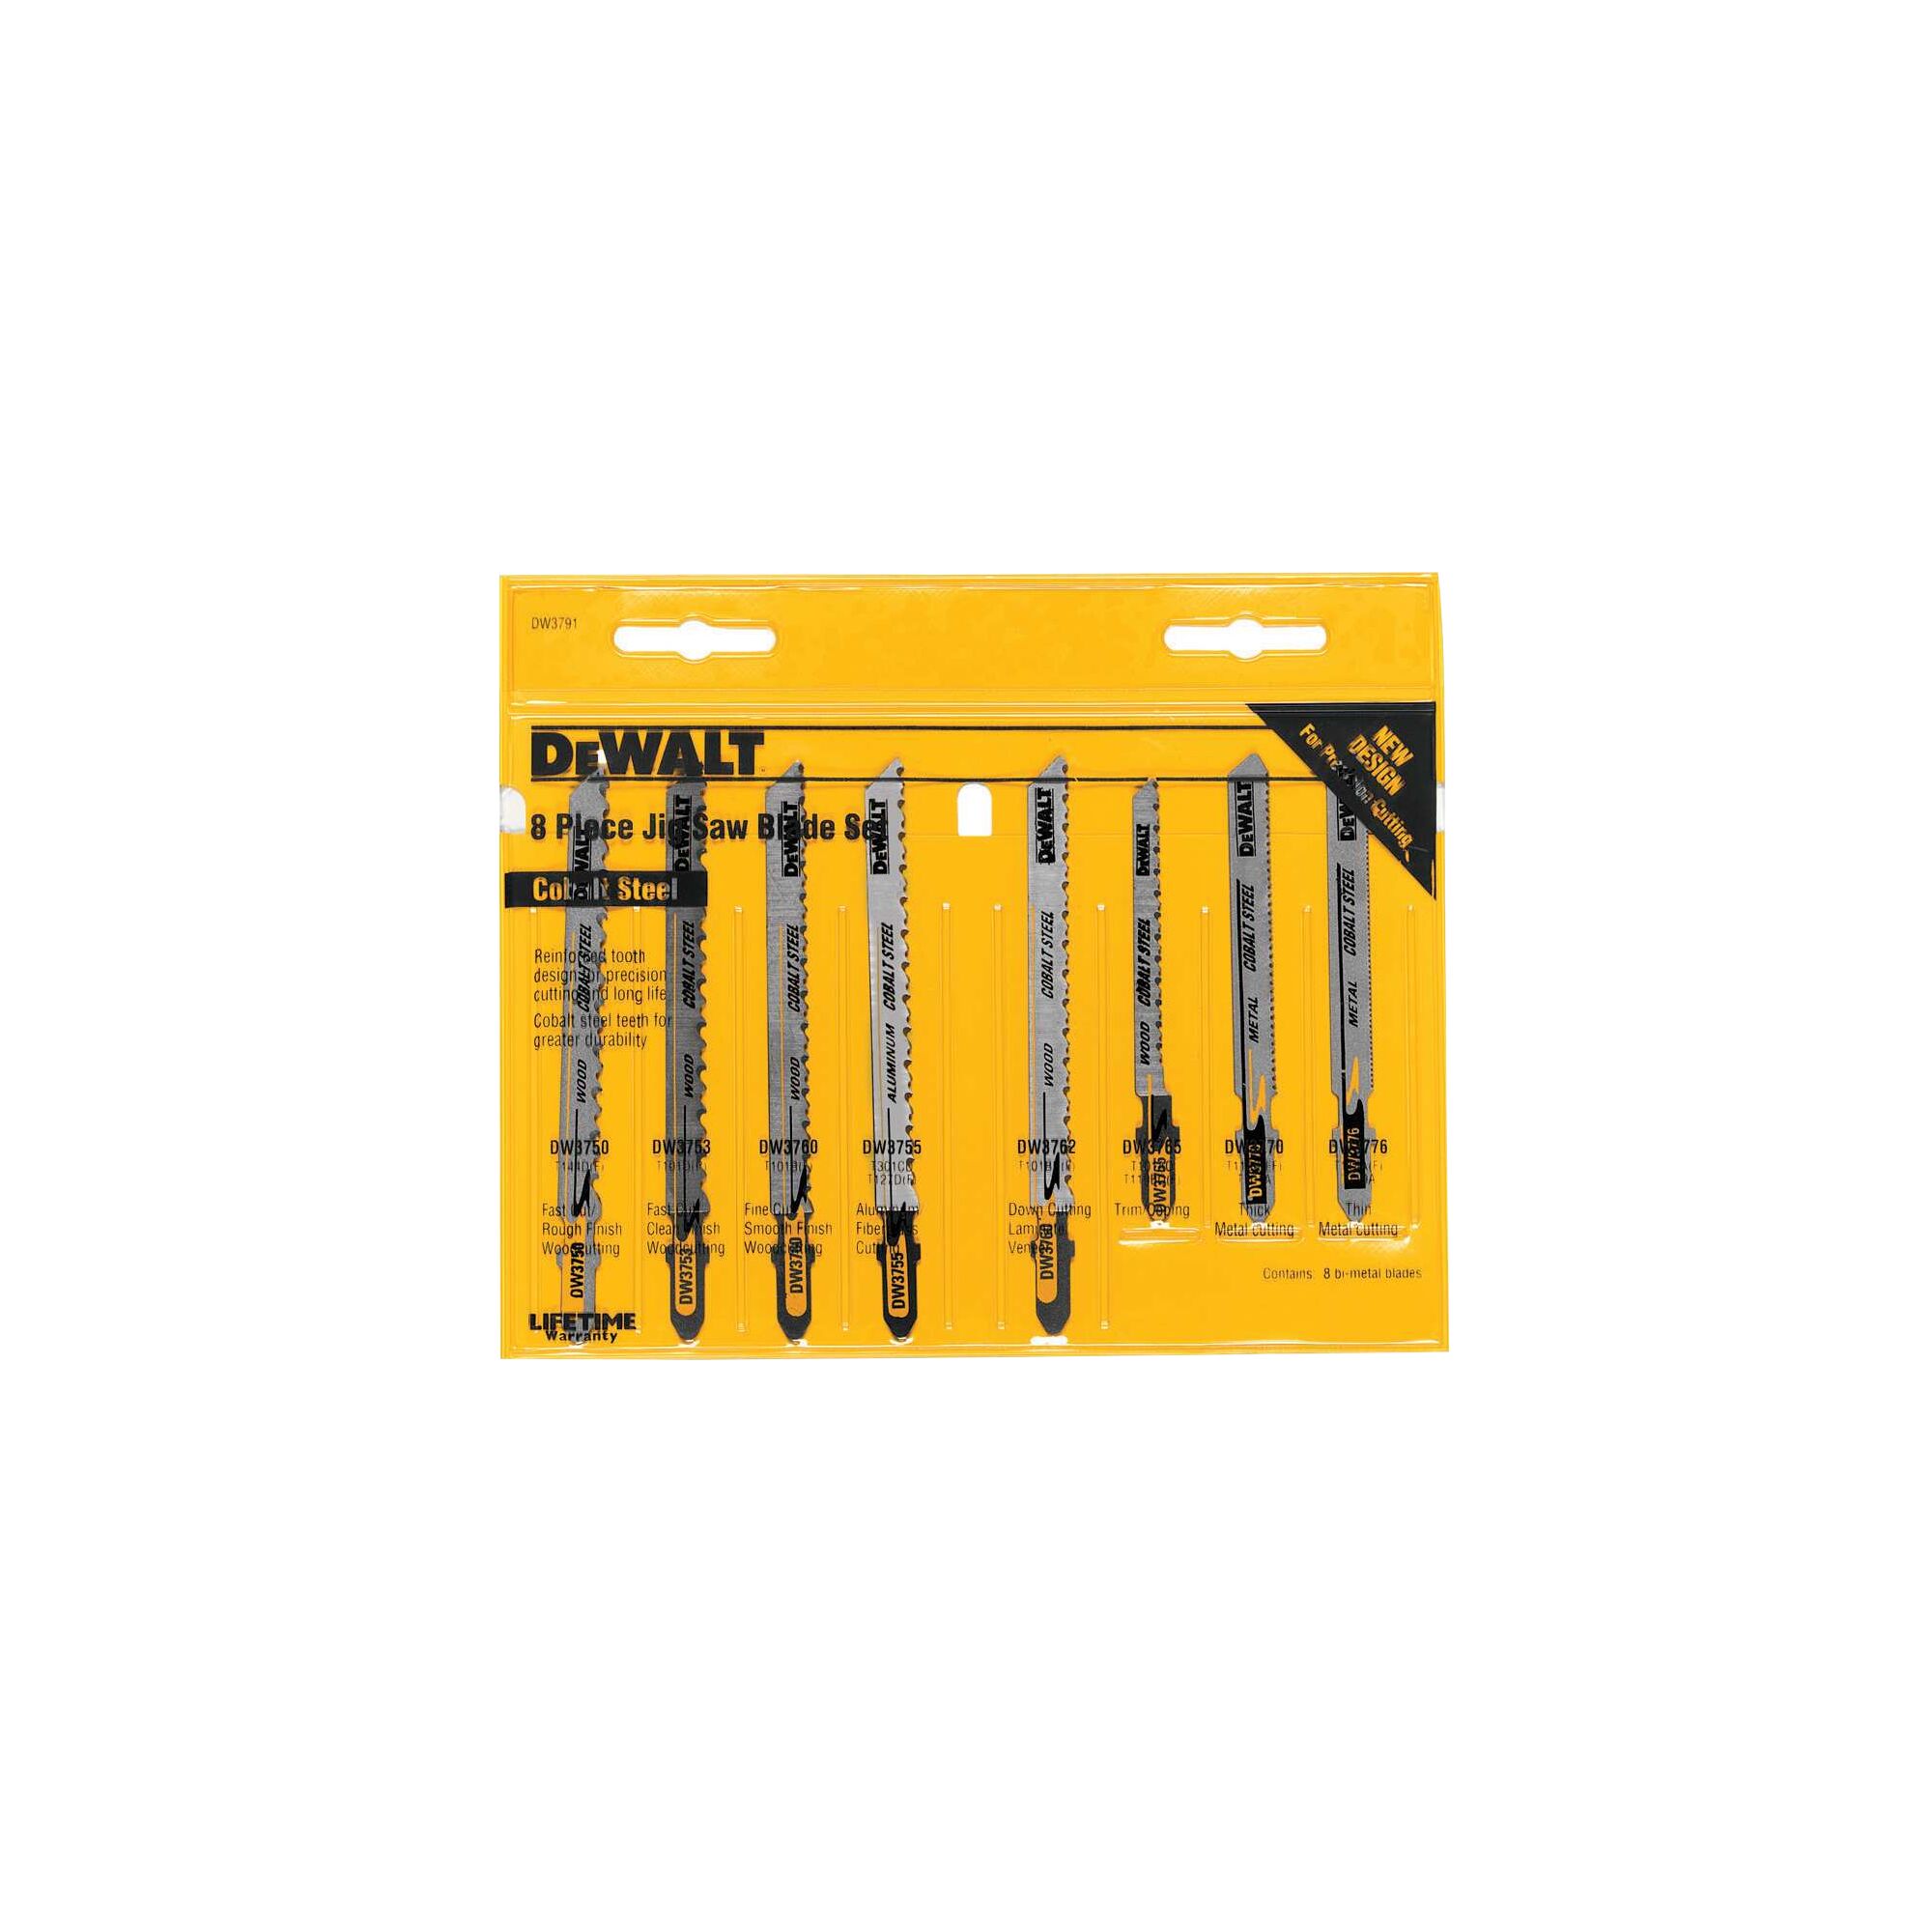 Details about   8 pc Jig Saw Sabre Saw Blade Set    ATG Brand   New Sealed PK 